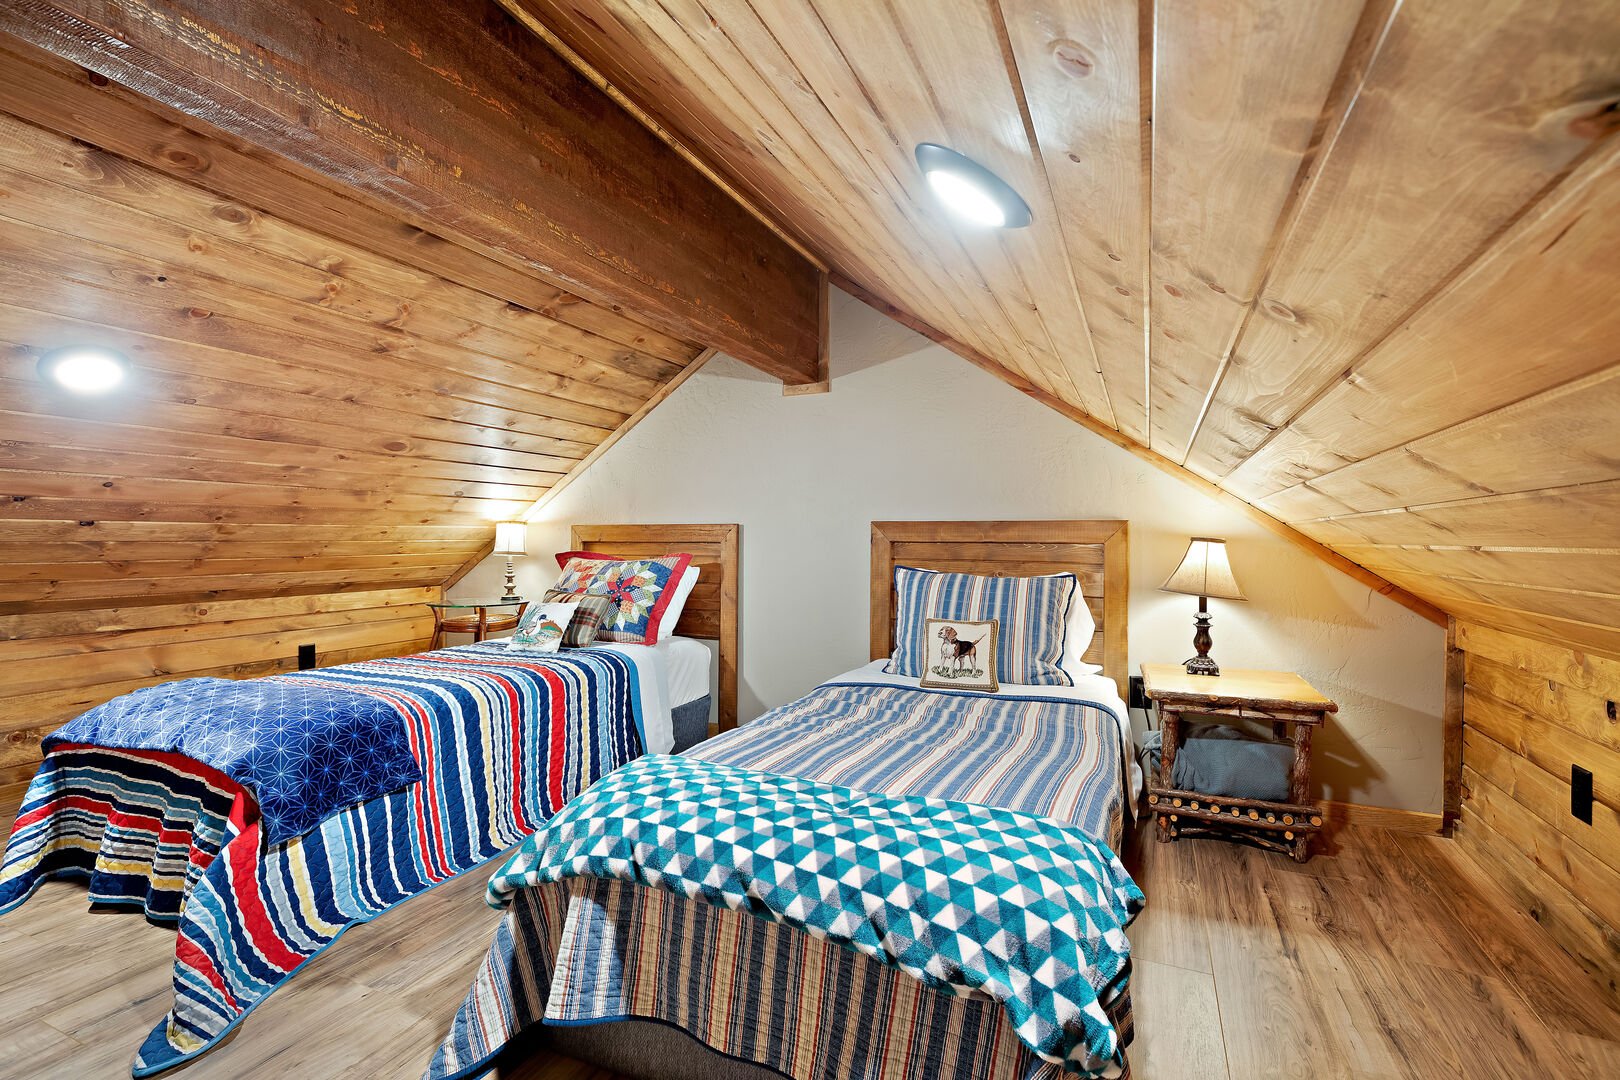 Set the Hook ~ LOFT bedroom #5 w/ 2 twin beds only accessible up steep ladder from upper level living area